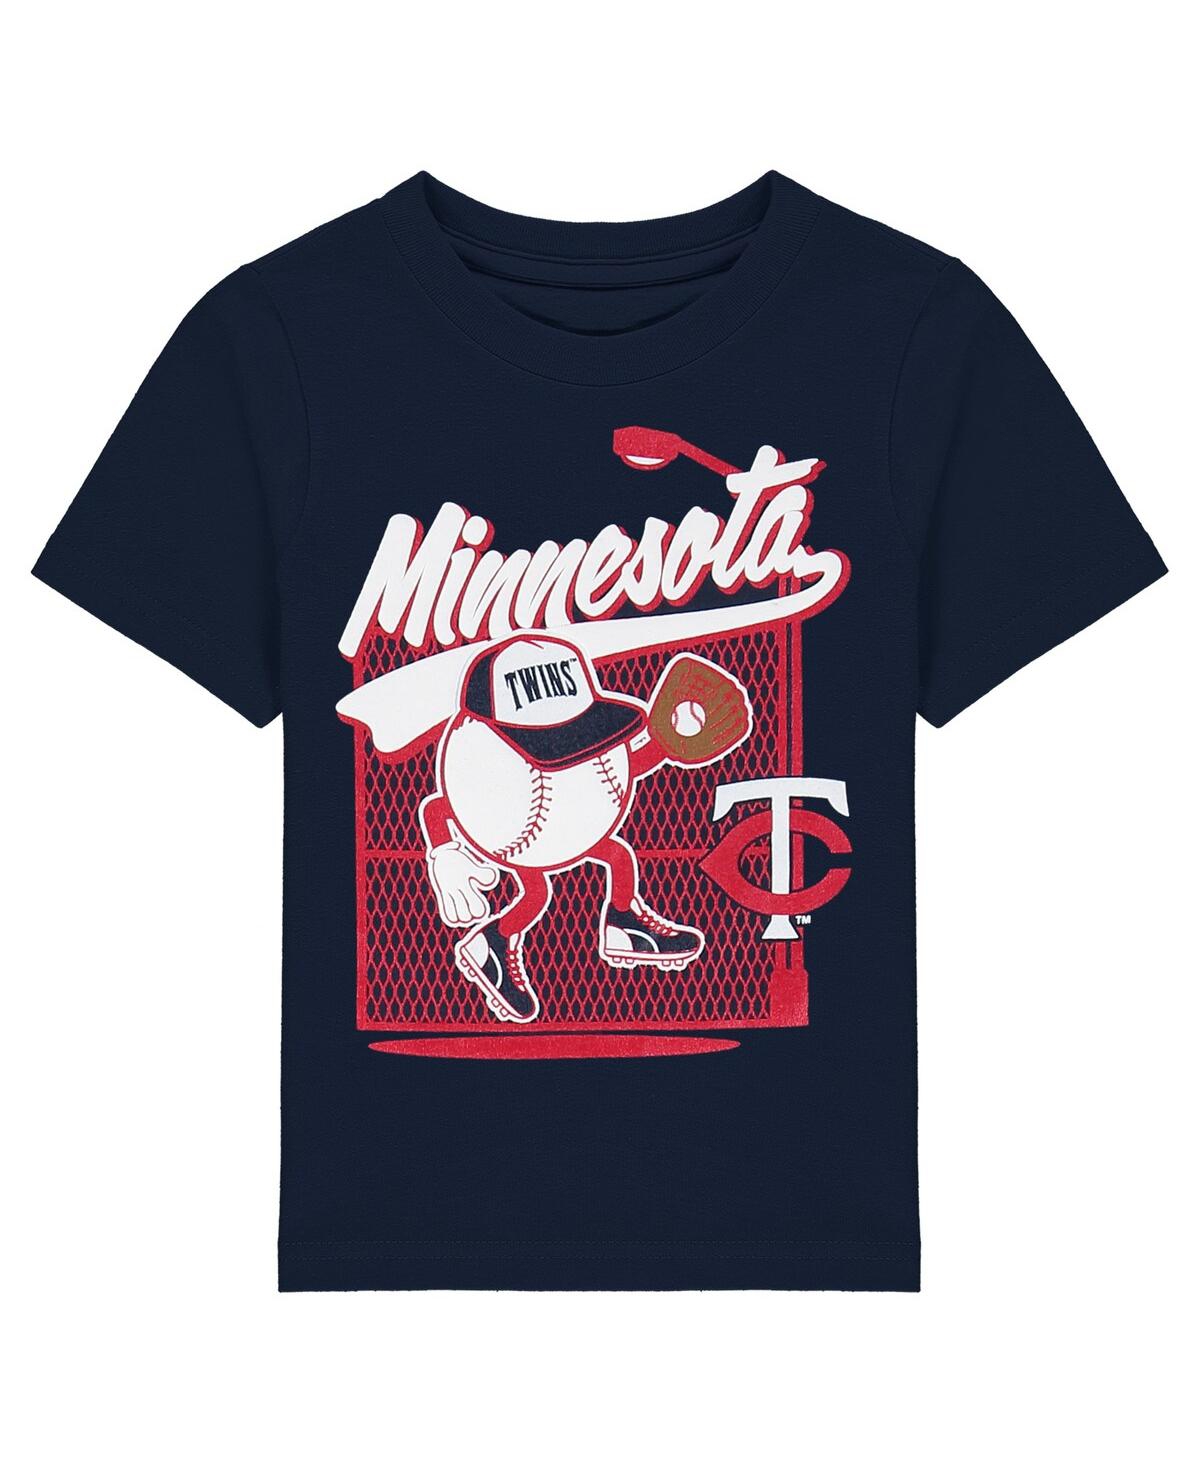 Outerstuff Babies' Toddler Boys And Girls Navy Minnesota Twins On The Fence T-shirt